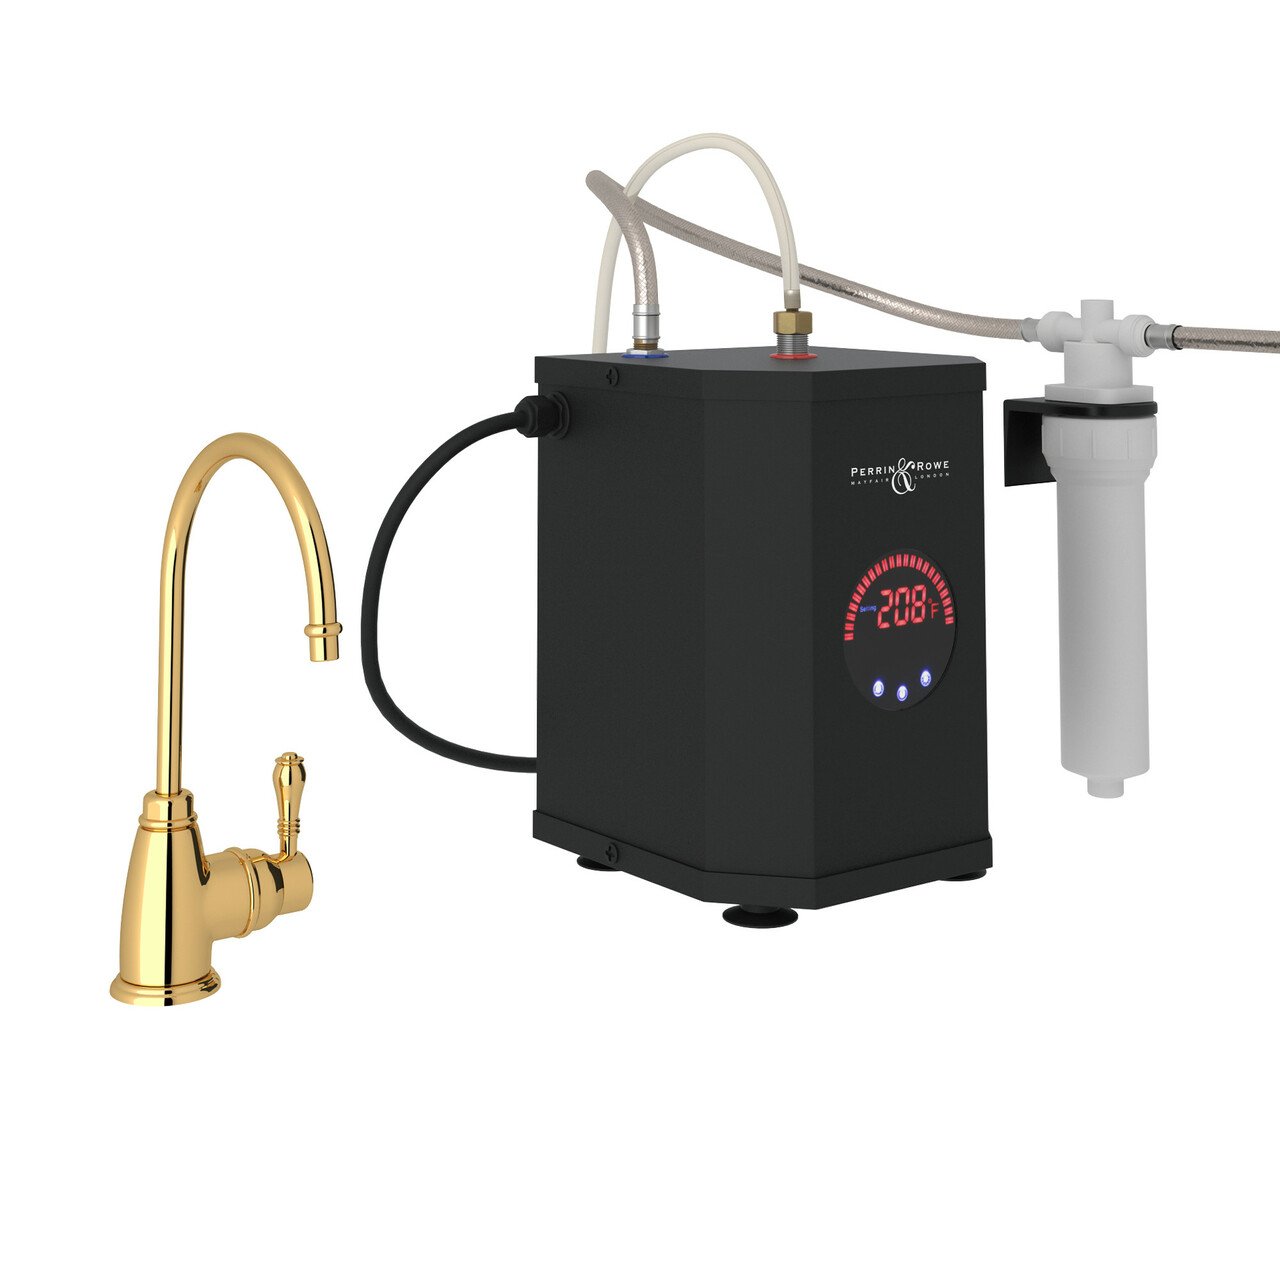 ROHL San Julio Traditional C-Spout Hot Water Faucet Tank and Filter Kit - BNGBath